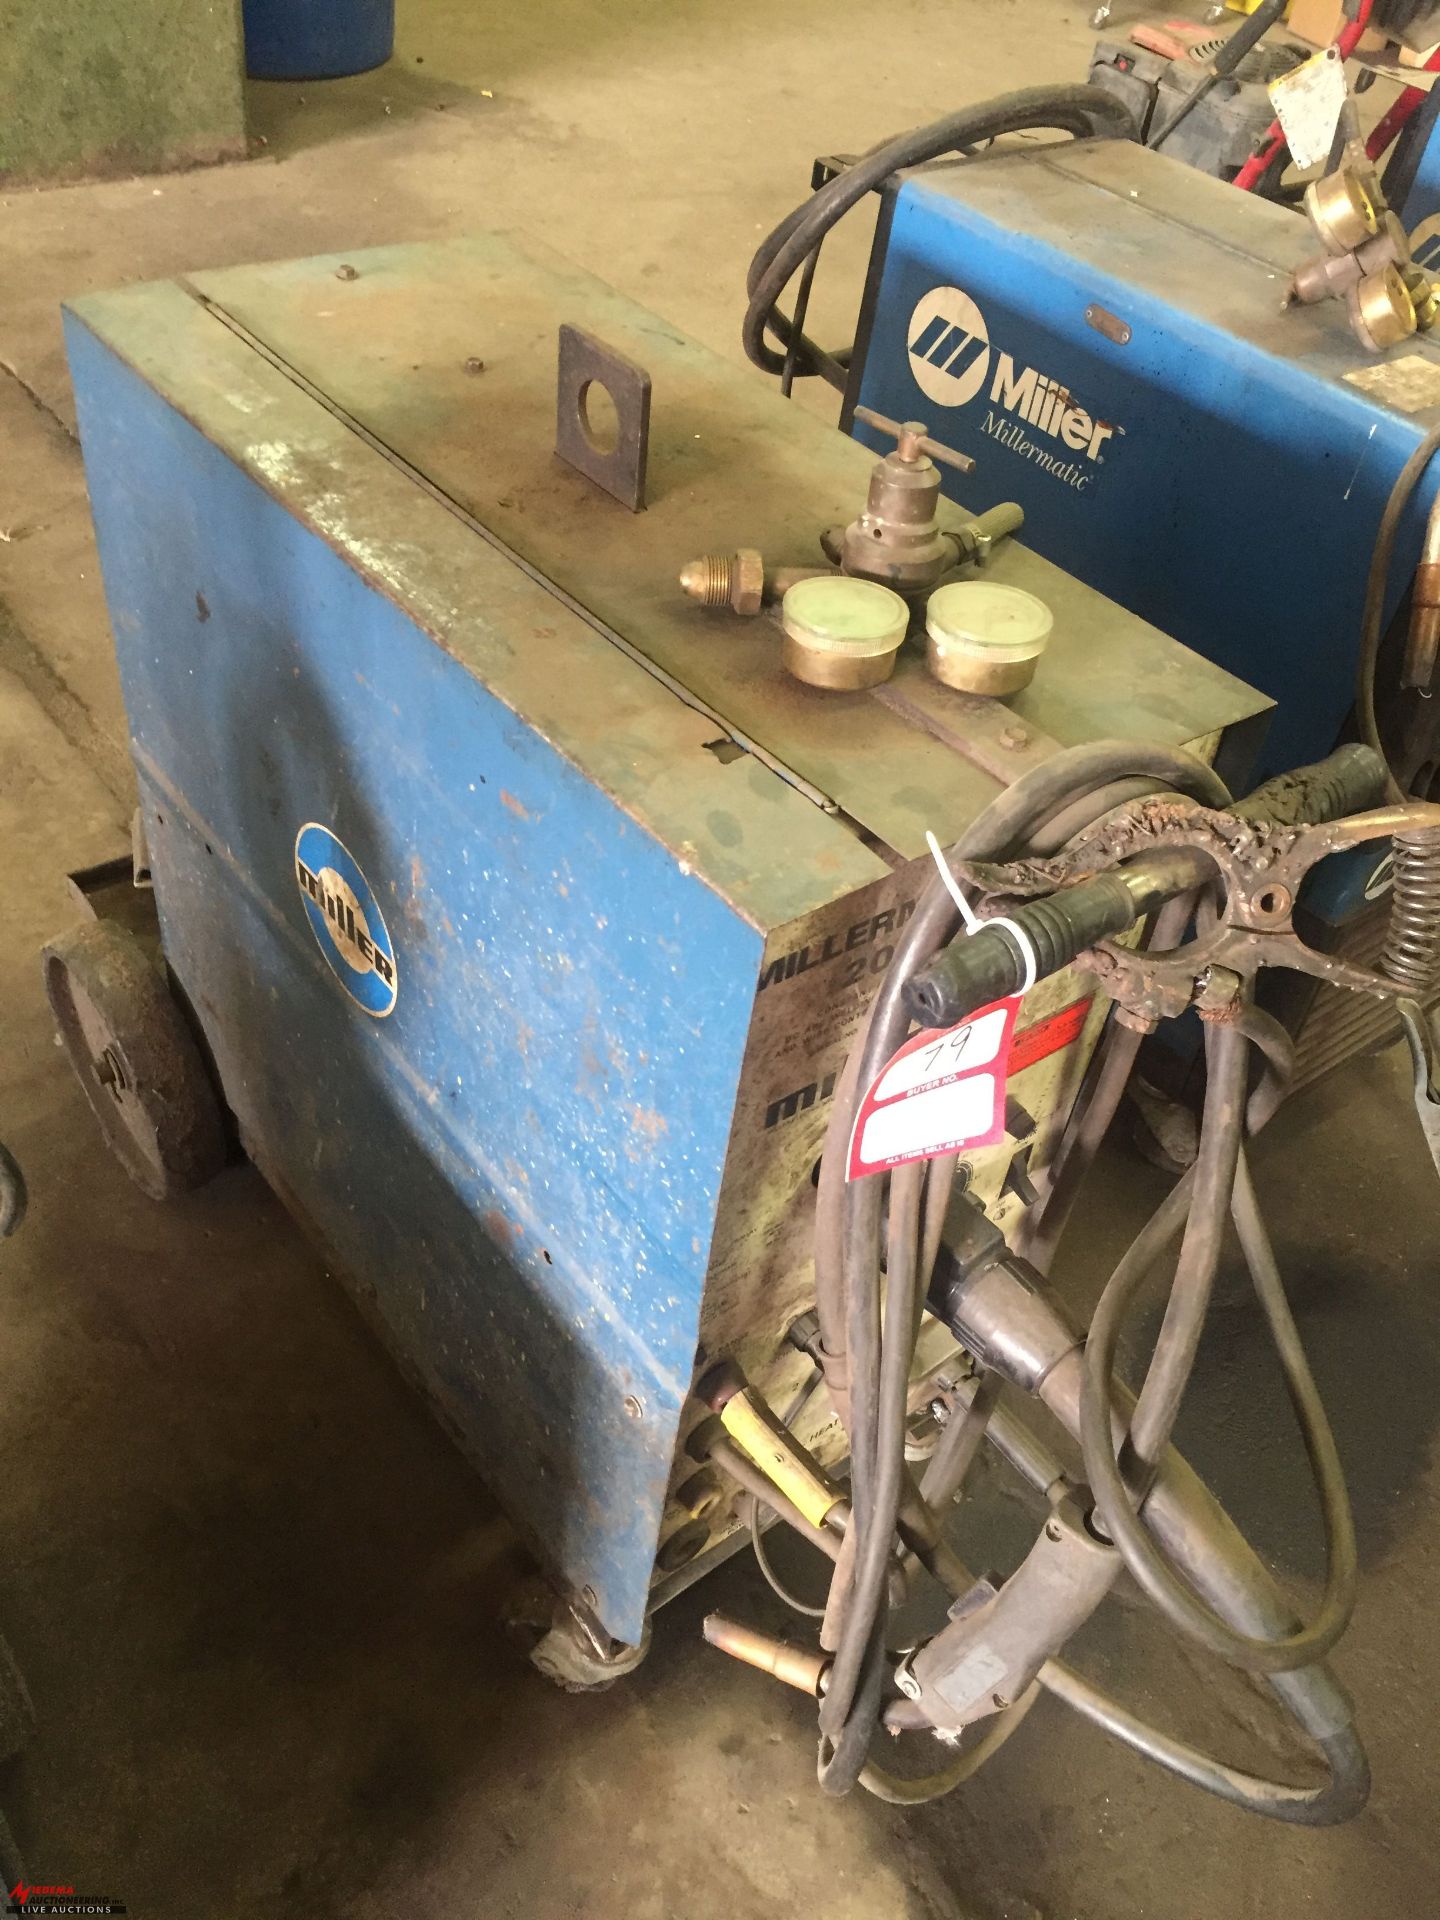 MILLER 200 WIRE FEED WELDER, 3 PHASE [LOCATION: EAST WINANS STREET LOCATION] - Image 2 of 3